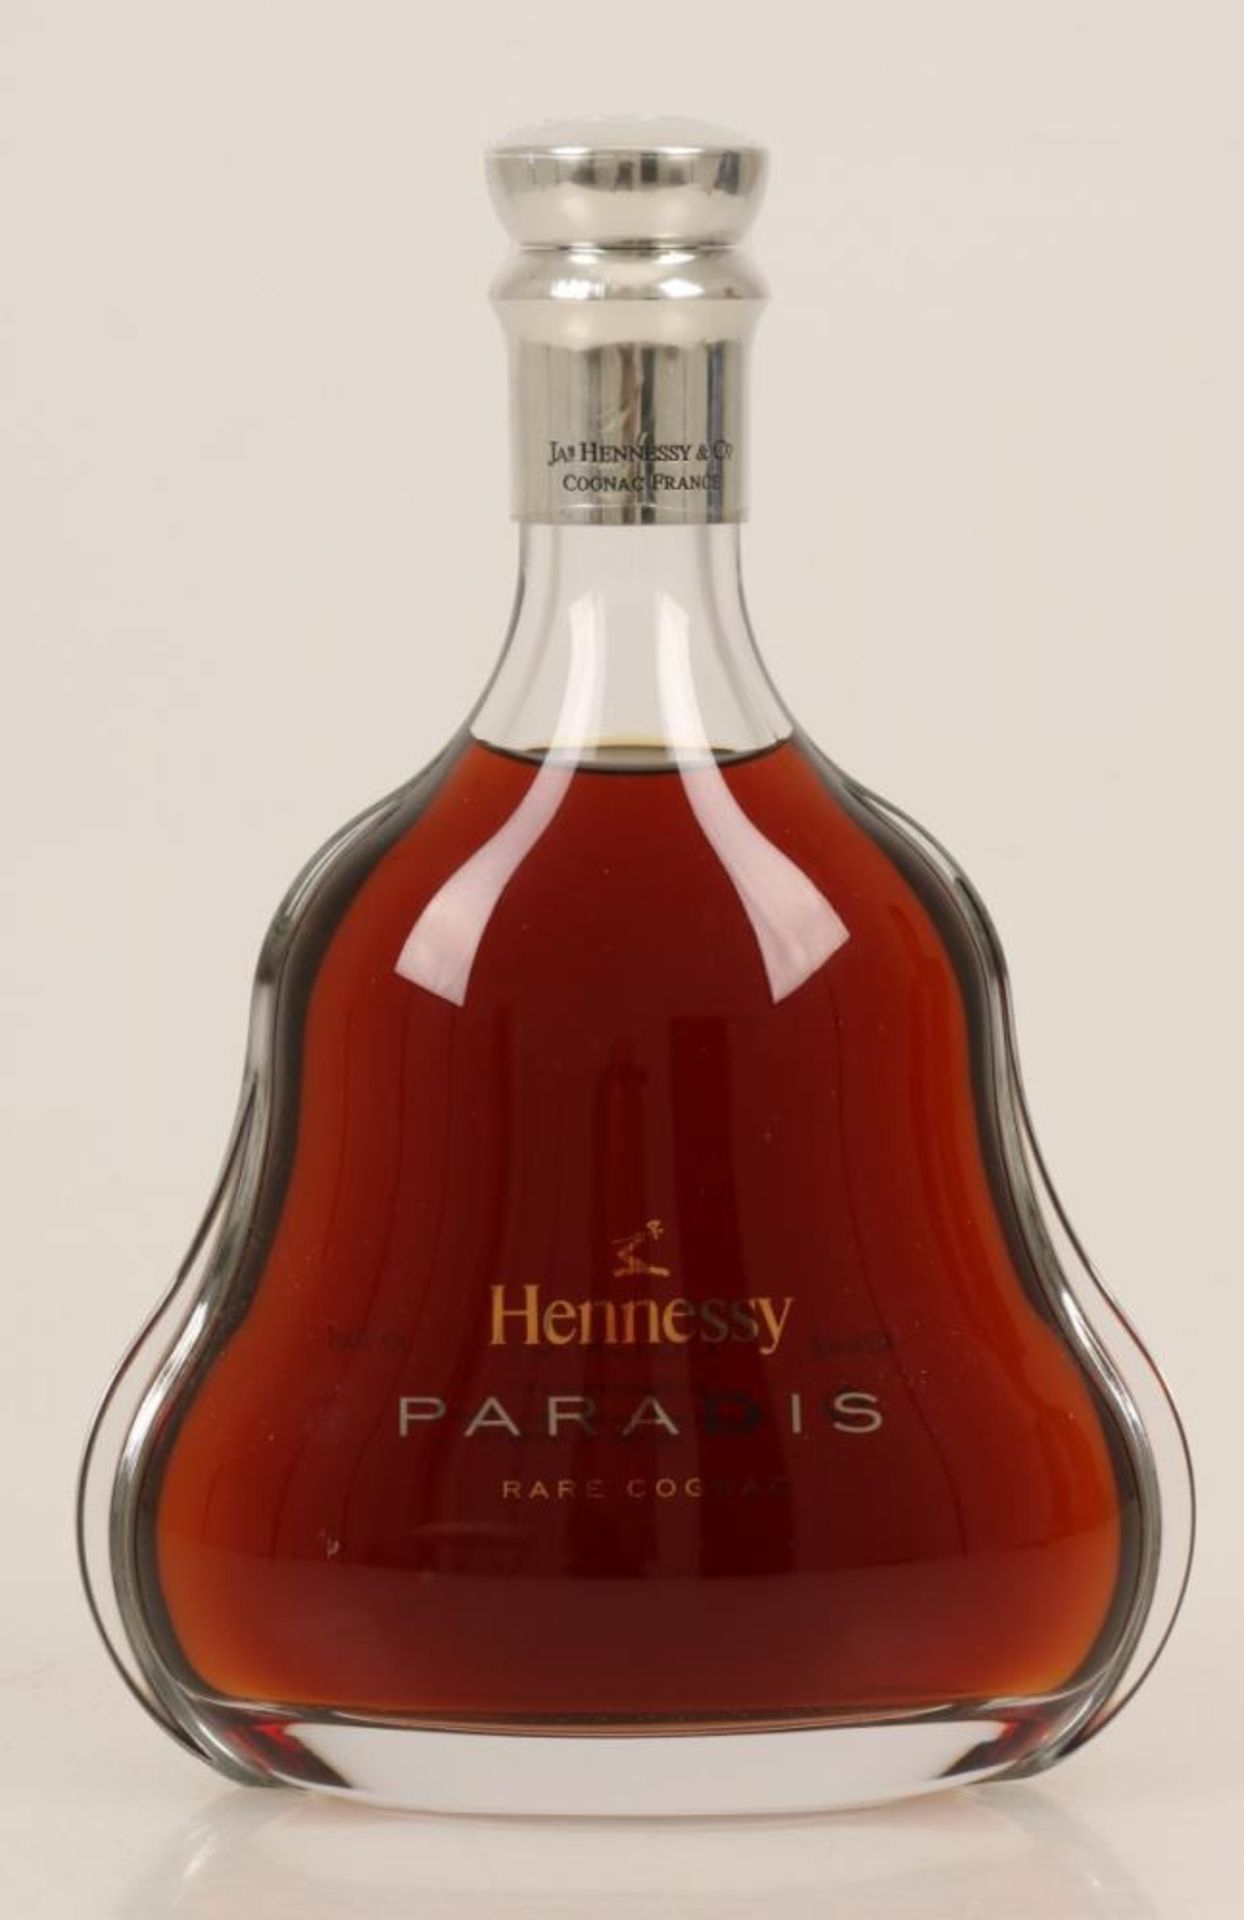 (70 cl) Hennessy Paradis.